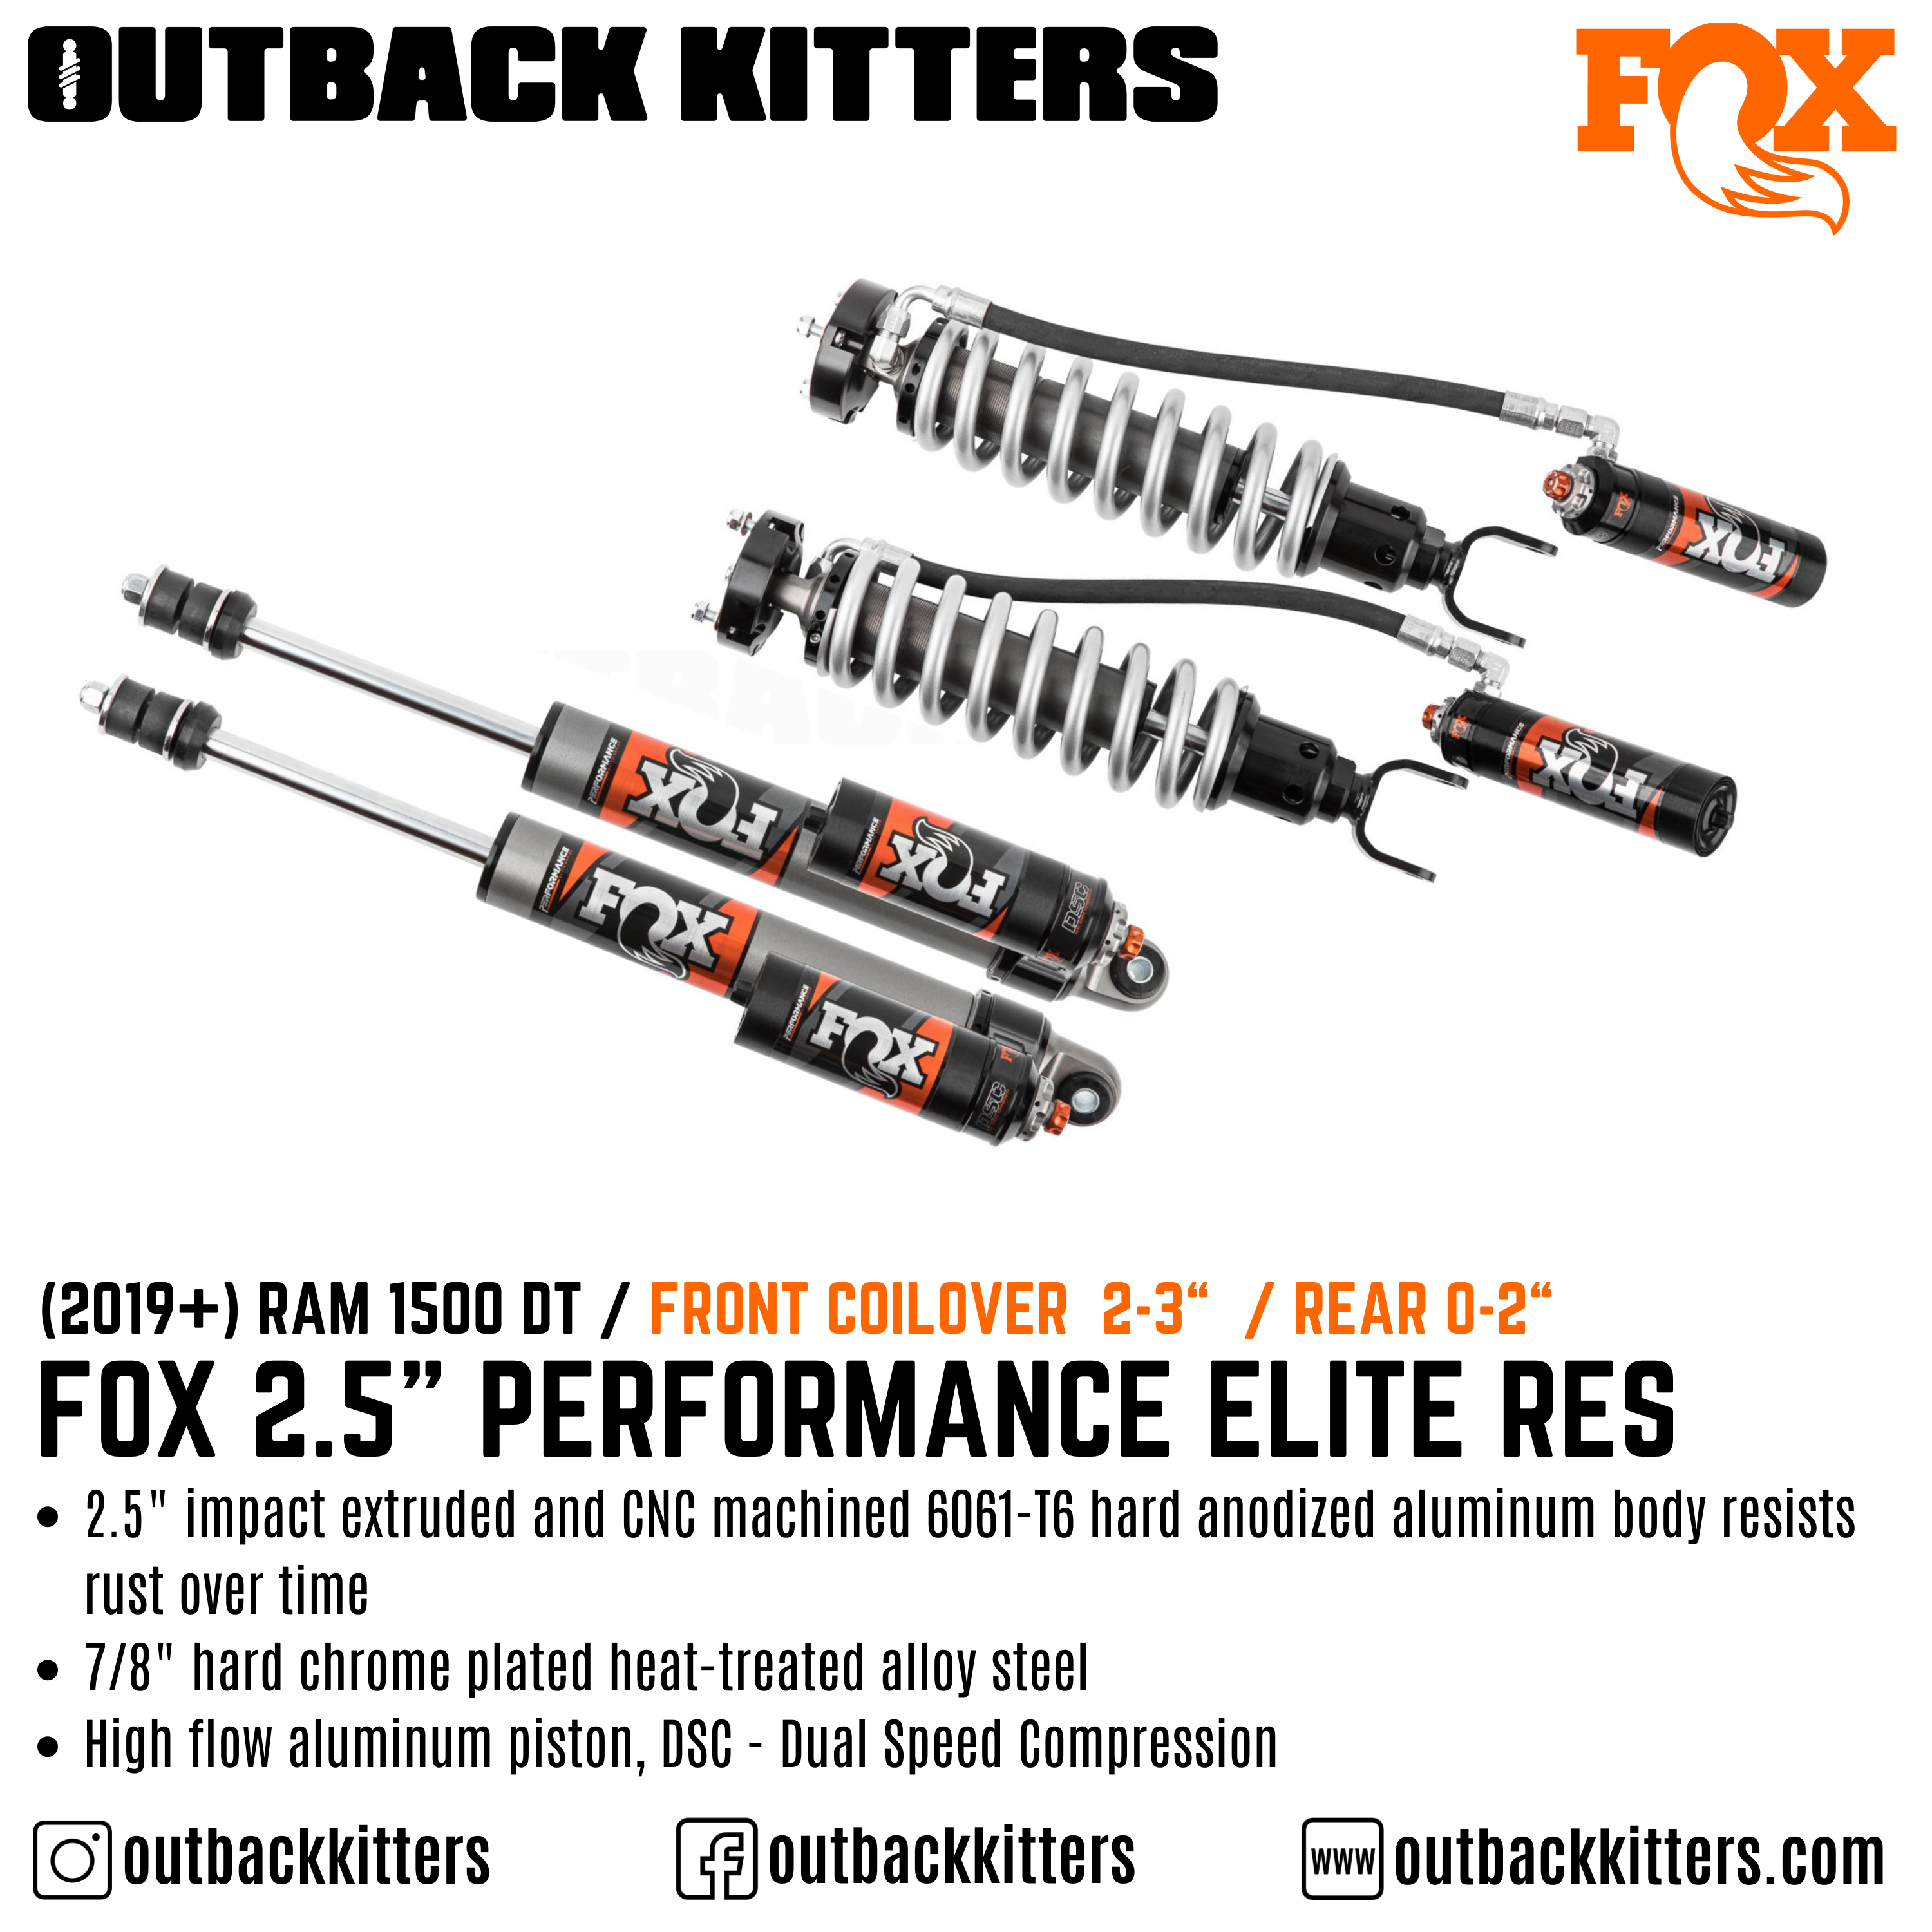 Fox Performance Elite 2.5" Remote Res Shocks for 2019+ Ram 1500 DT - Outback Kitters